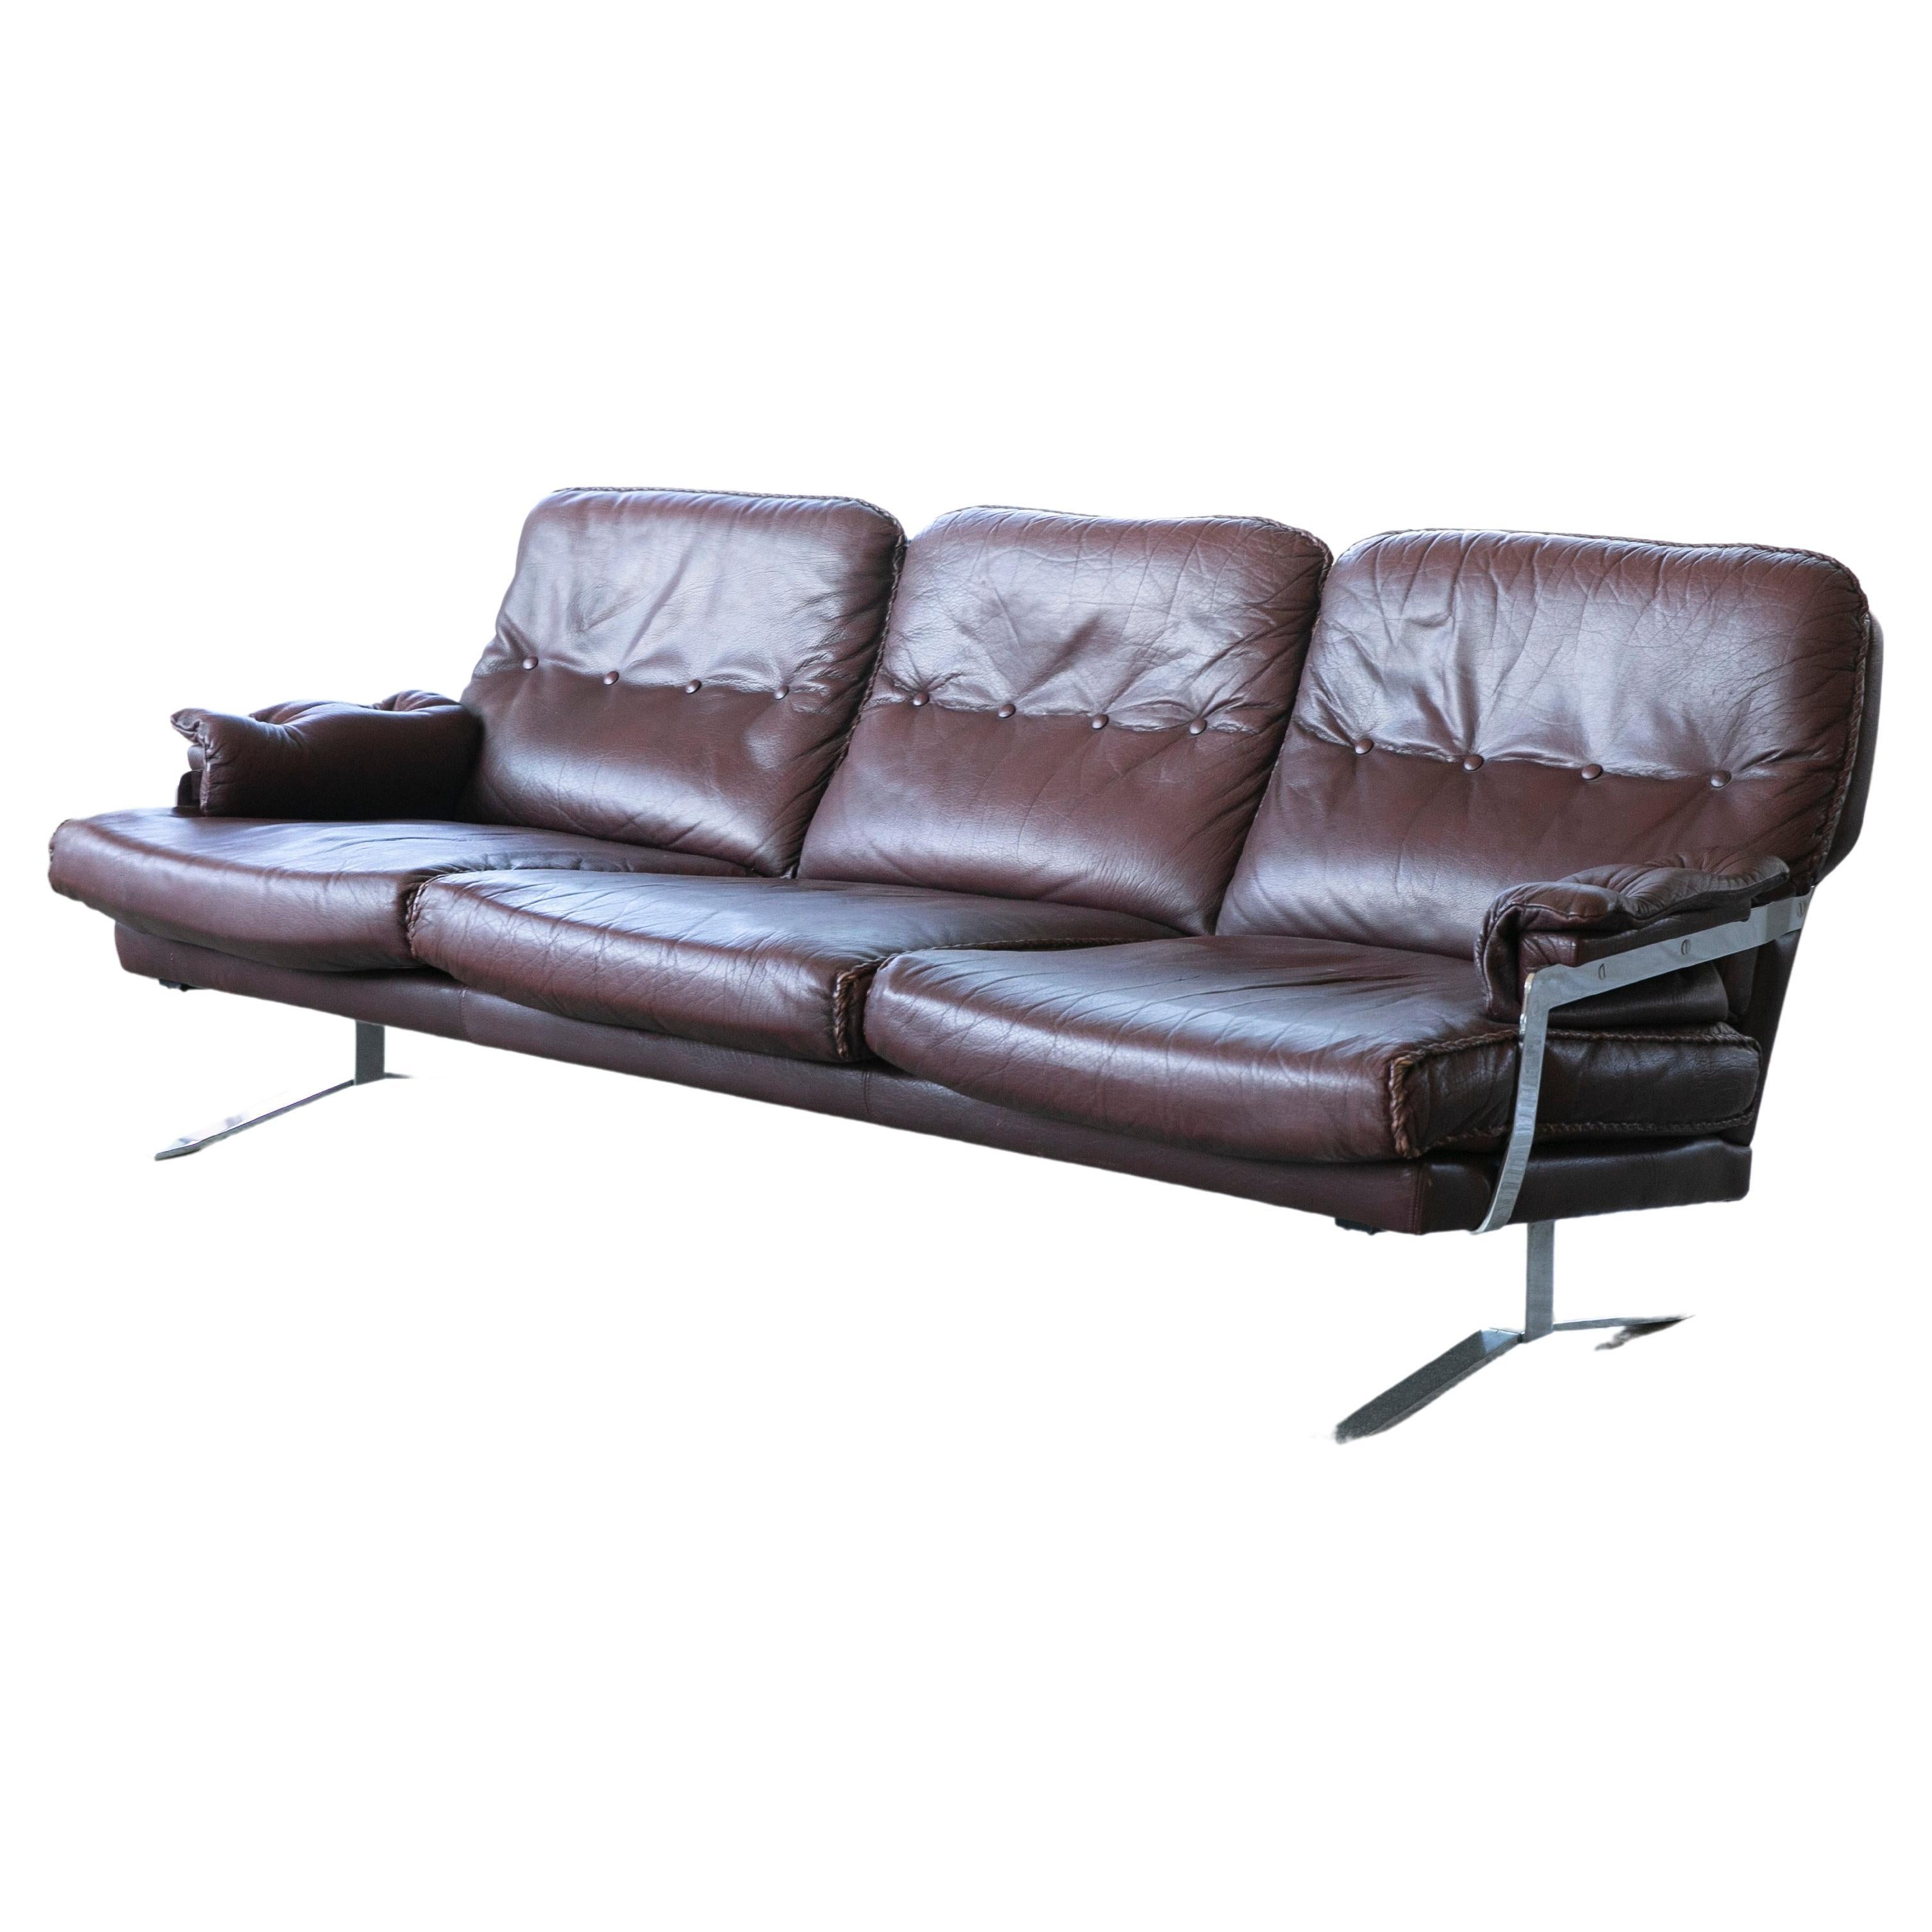 Arne Norell 1970s Three-Seat Sofa in Brown Buffalo Leather with Chrome Base